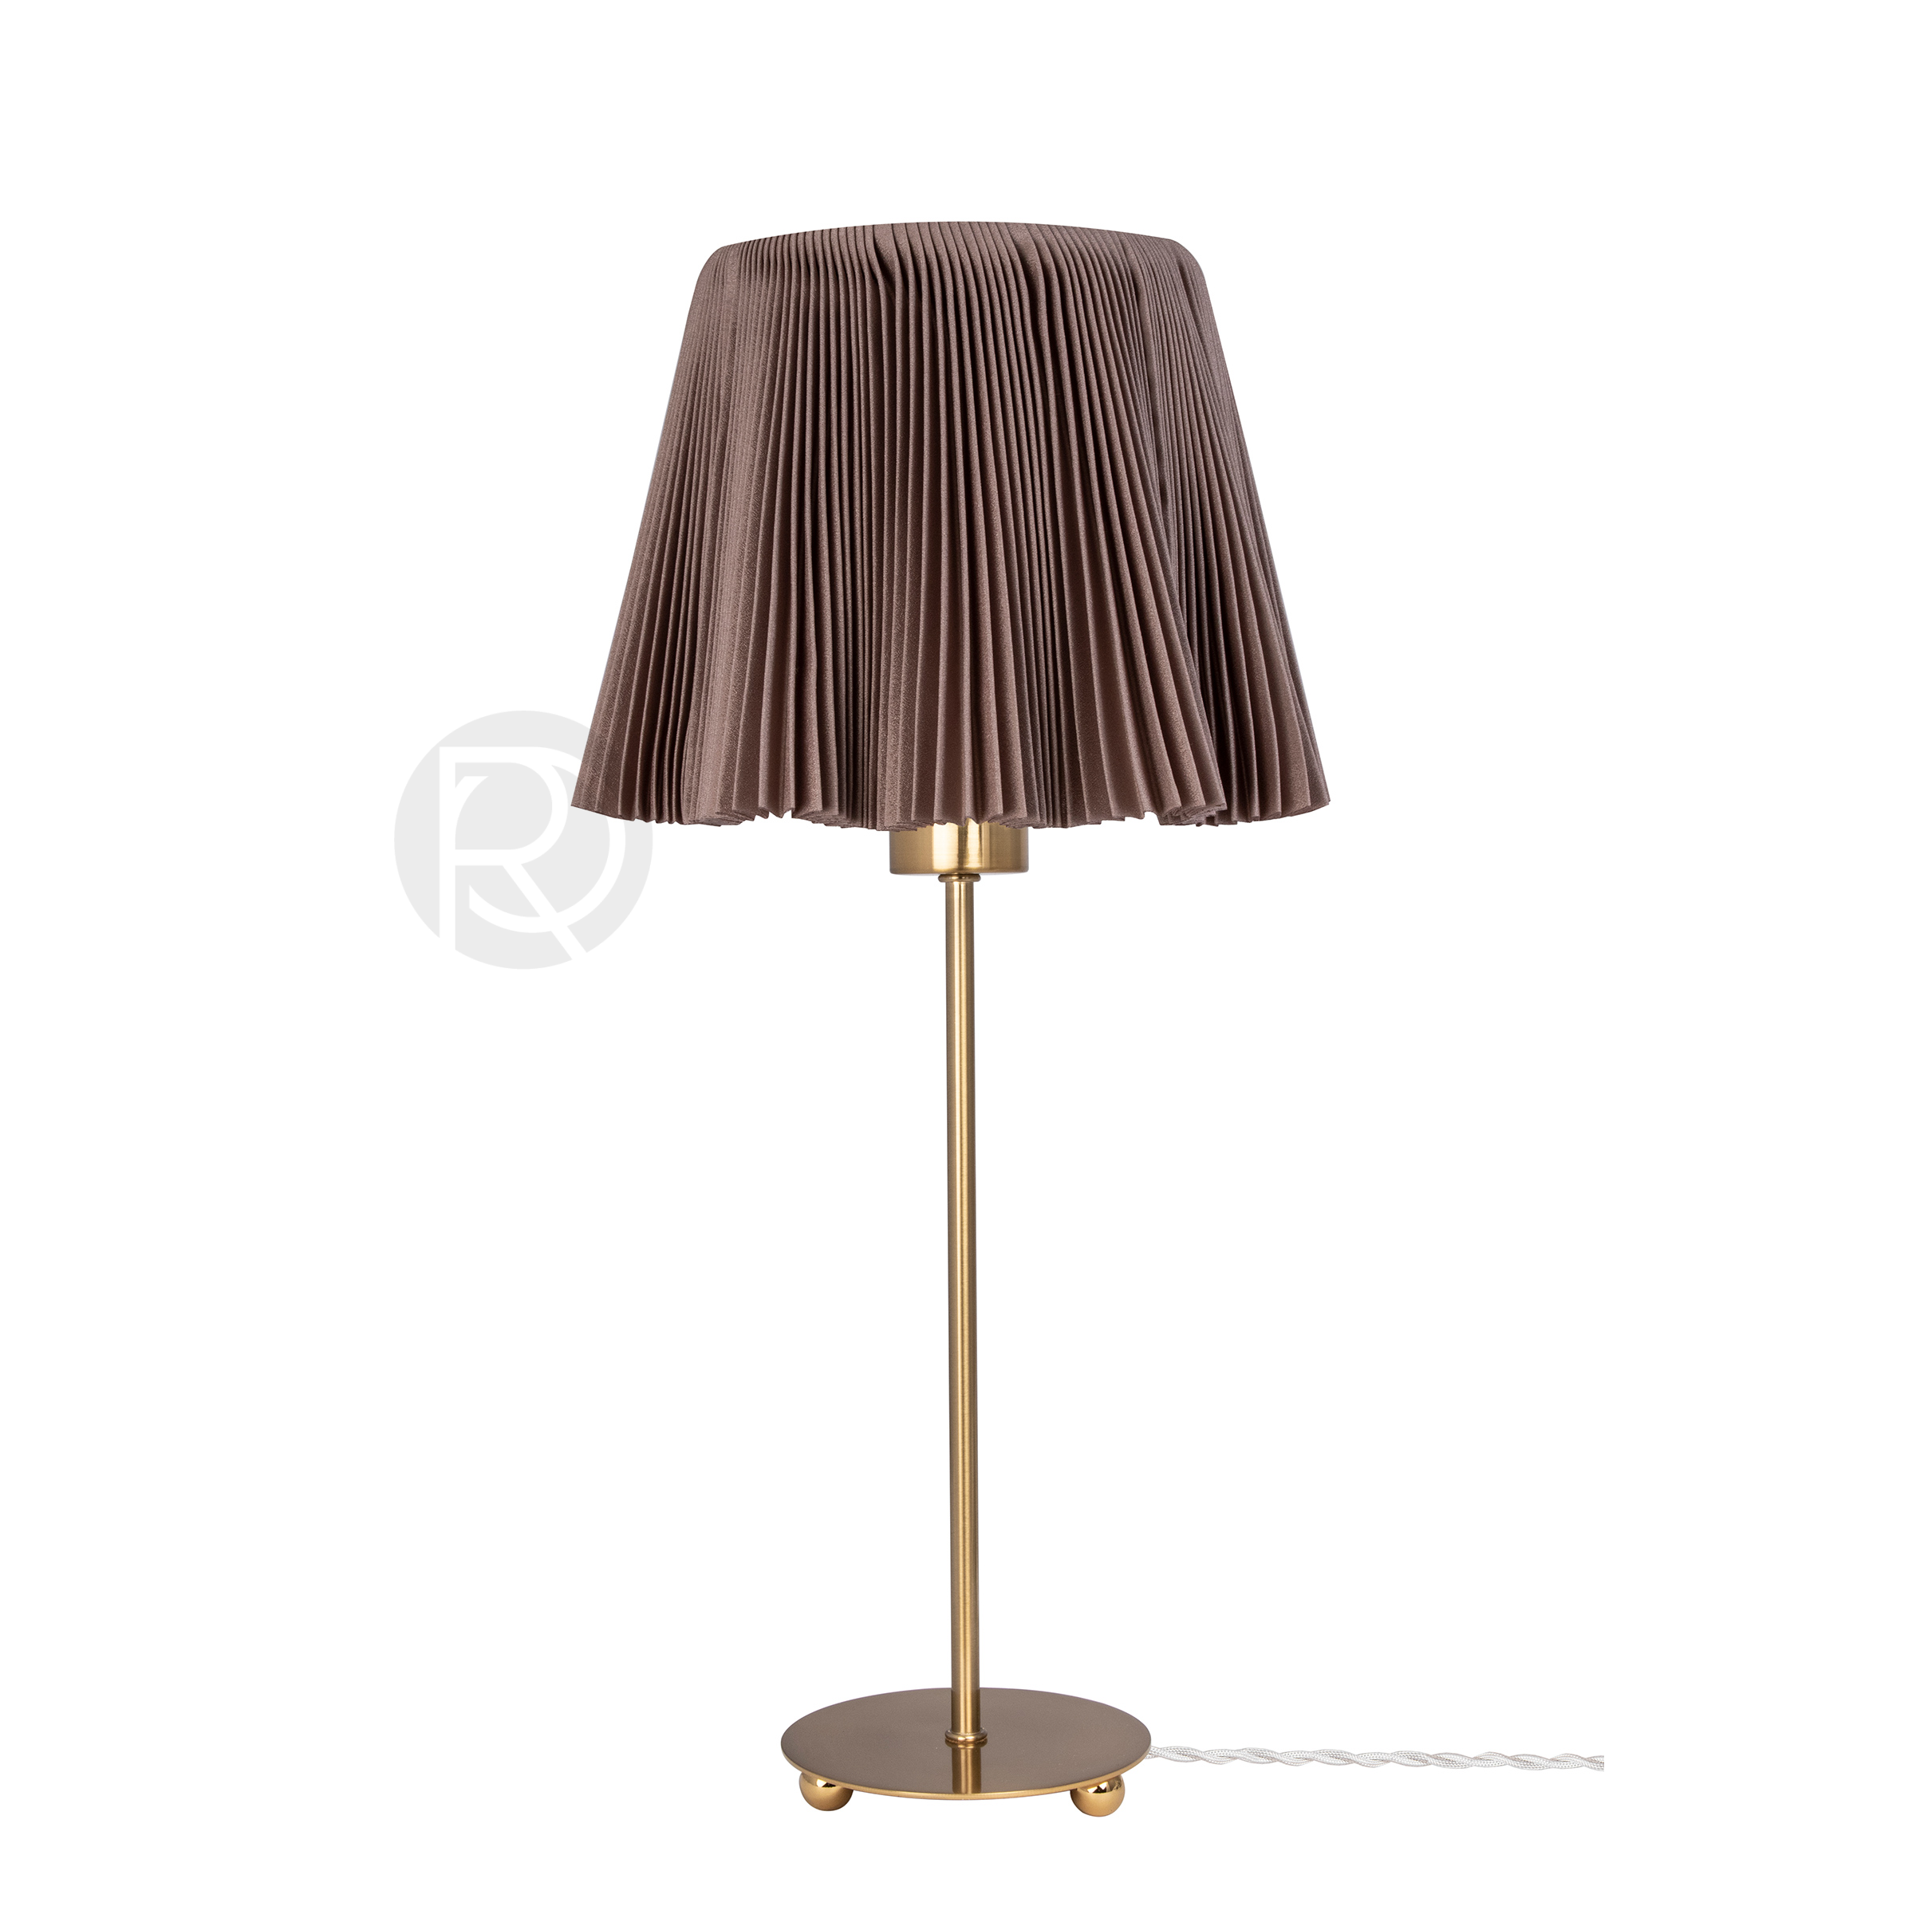 Table lamp EDITH by Globen